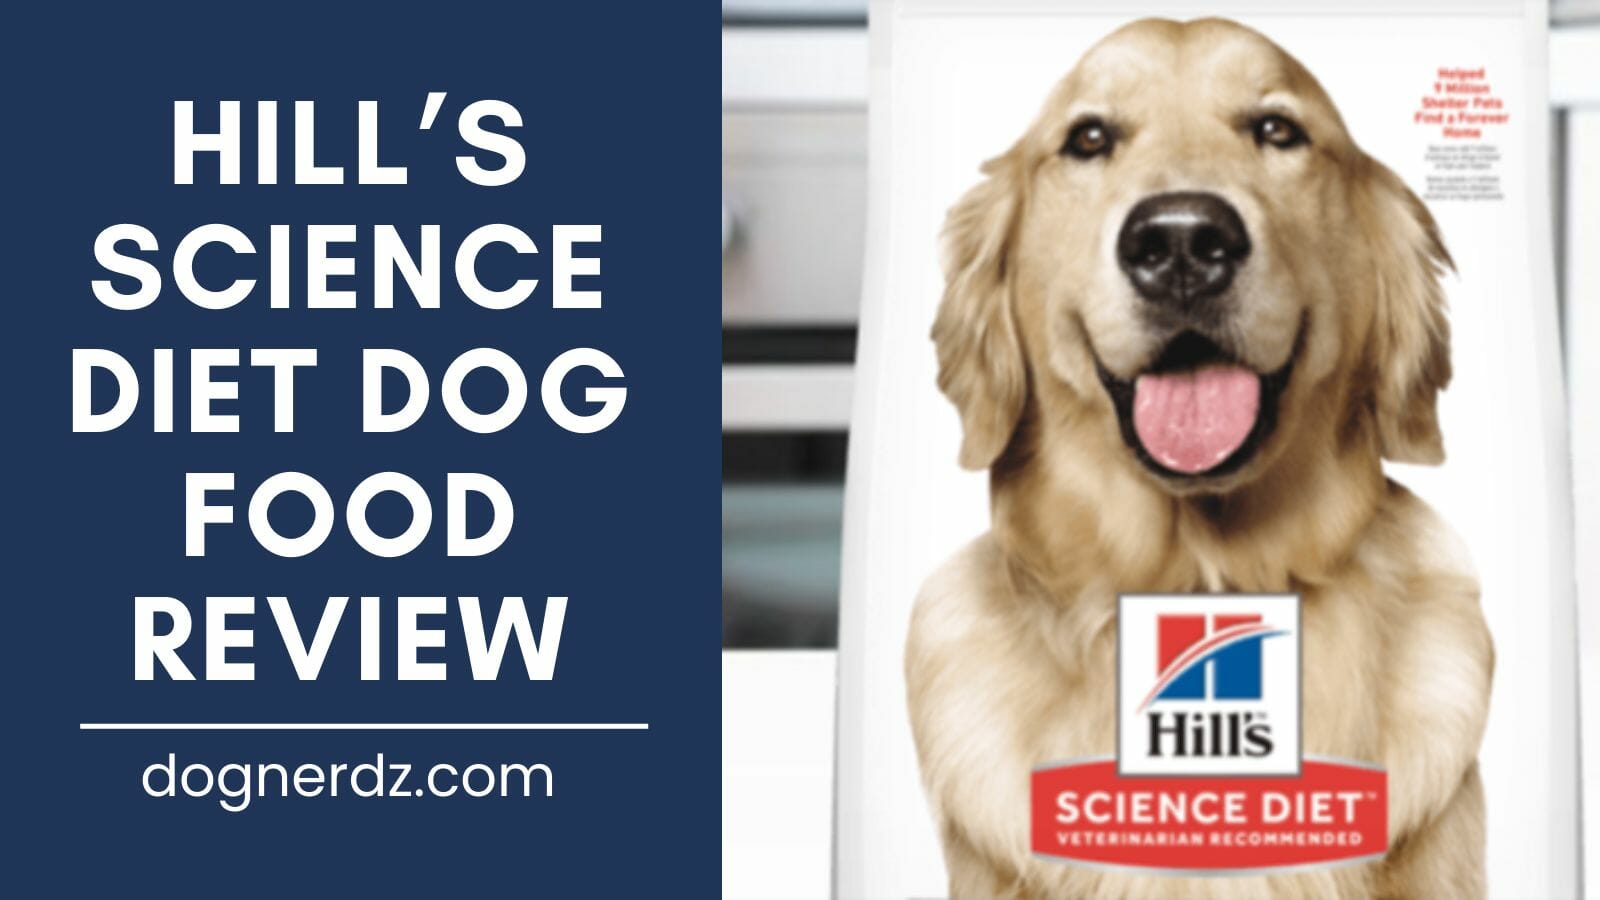 review of the hill’s science diet dog food